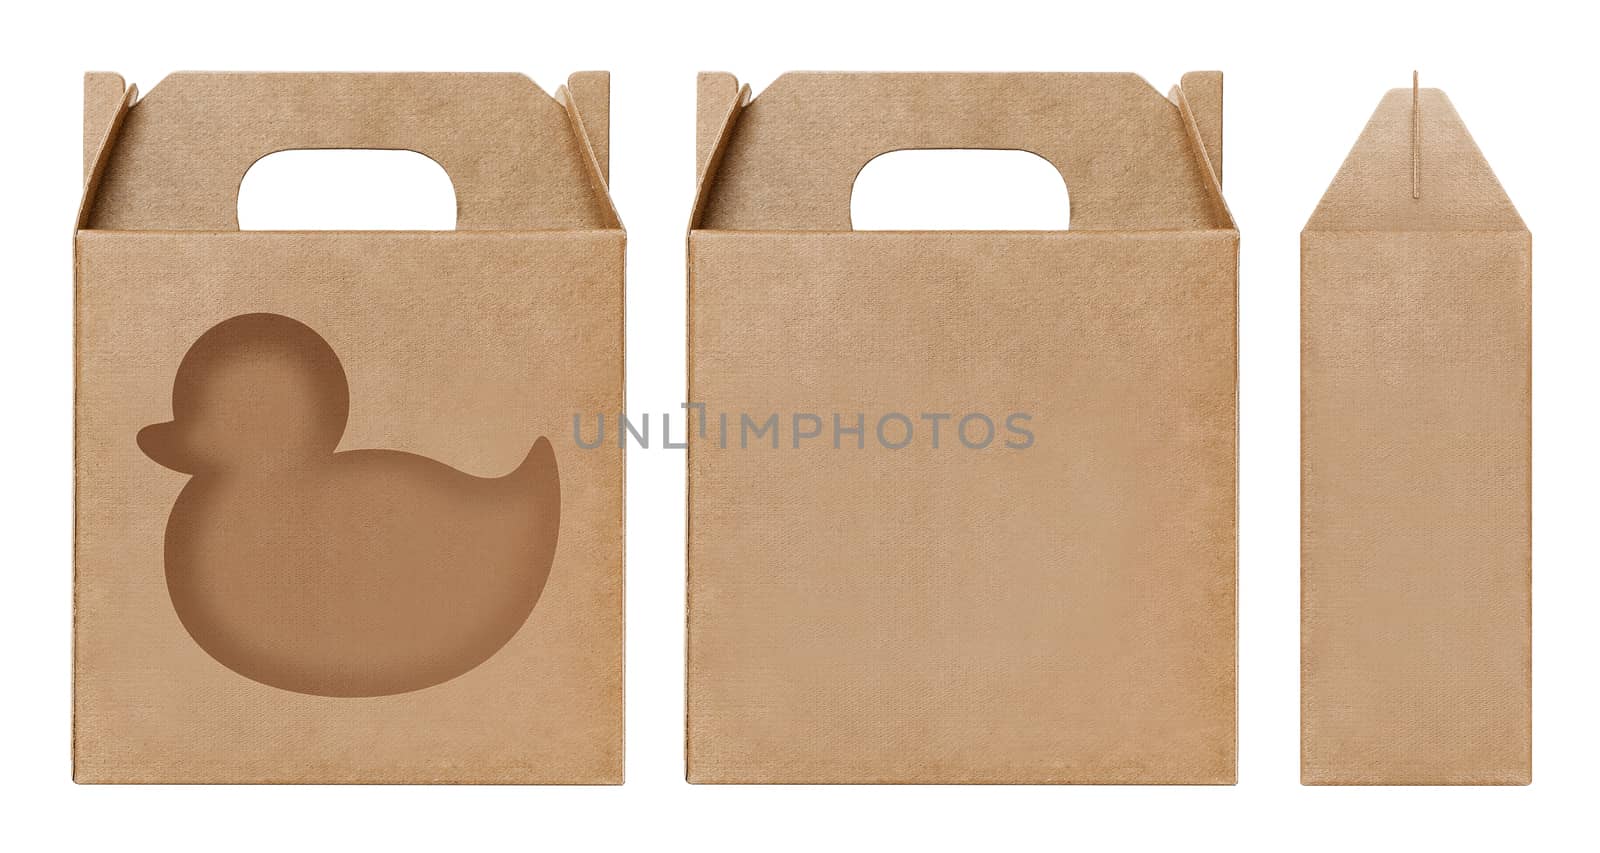 Box brown window Duck shape cut out Packaging template, Empty kraft Box Cardboard isolated white background, Boxes Paper kraft natural material, Gift Box Brown Paper from Industrial Packaging carton